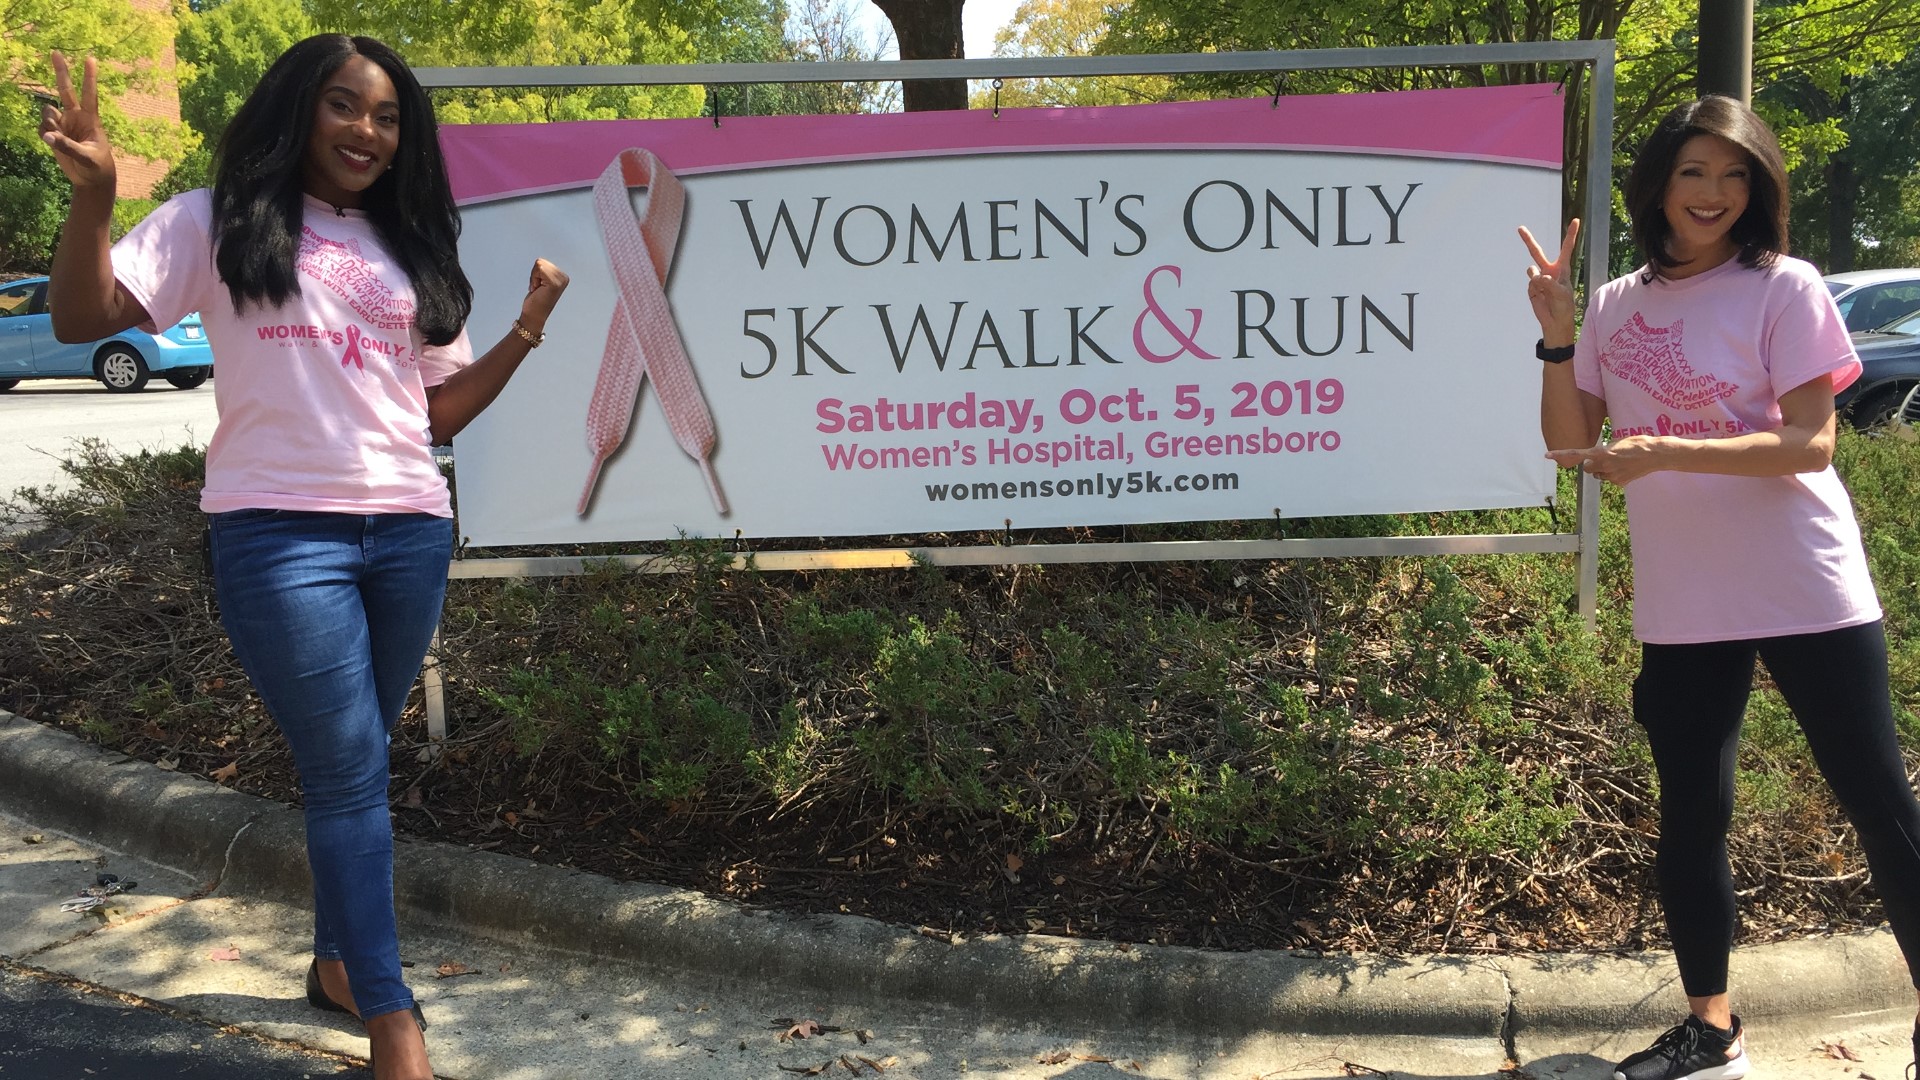 Wear your pink and walk with us on October 5 to help raise money for women who can't afford mammograms in the fight against breast cancer.